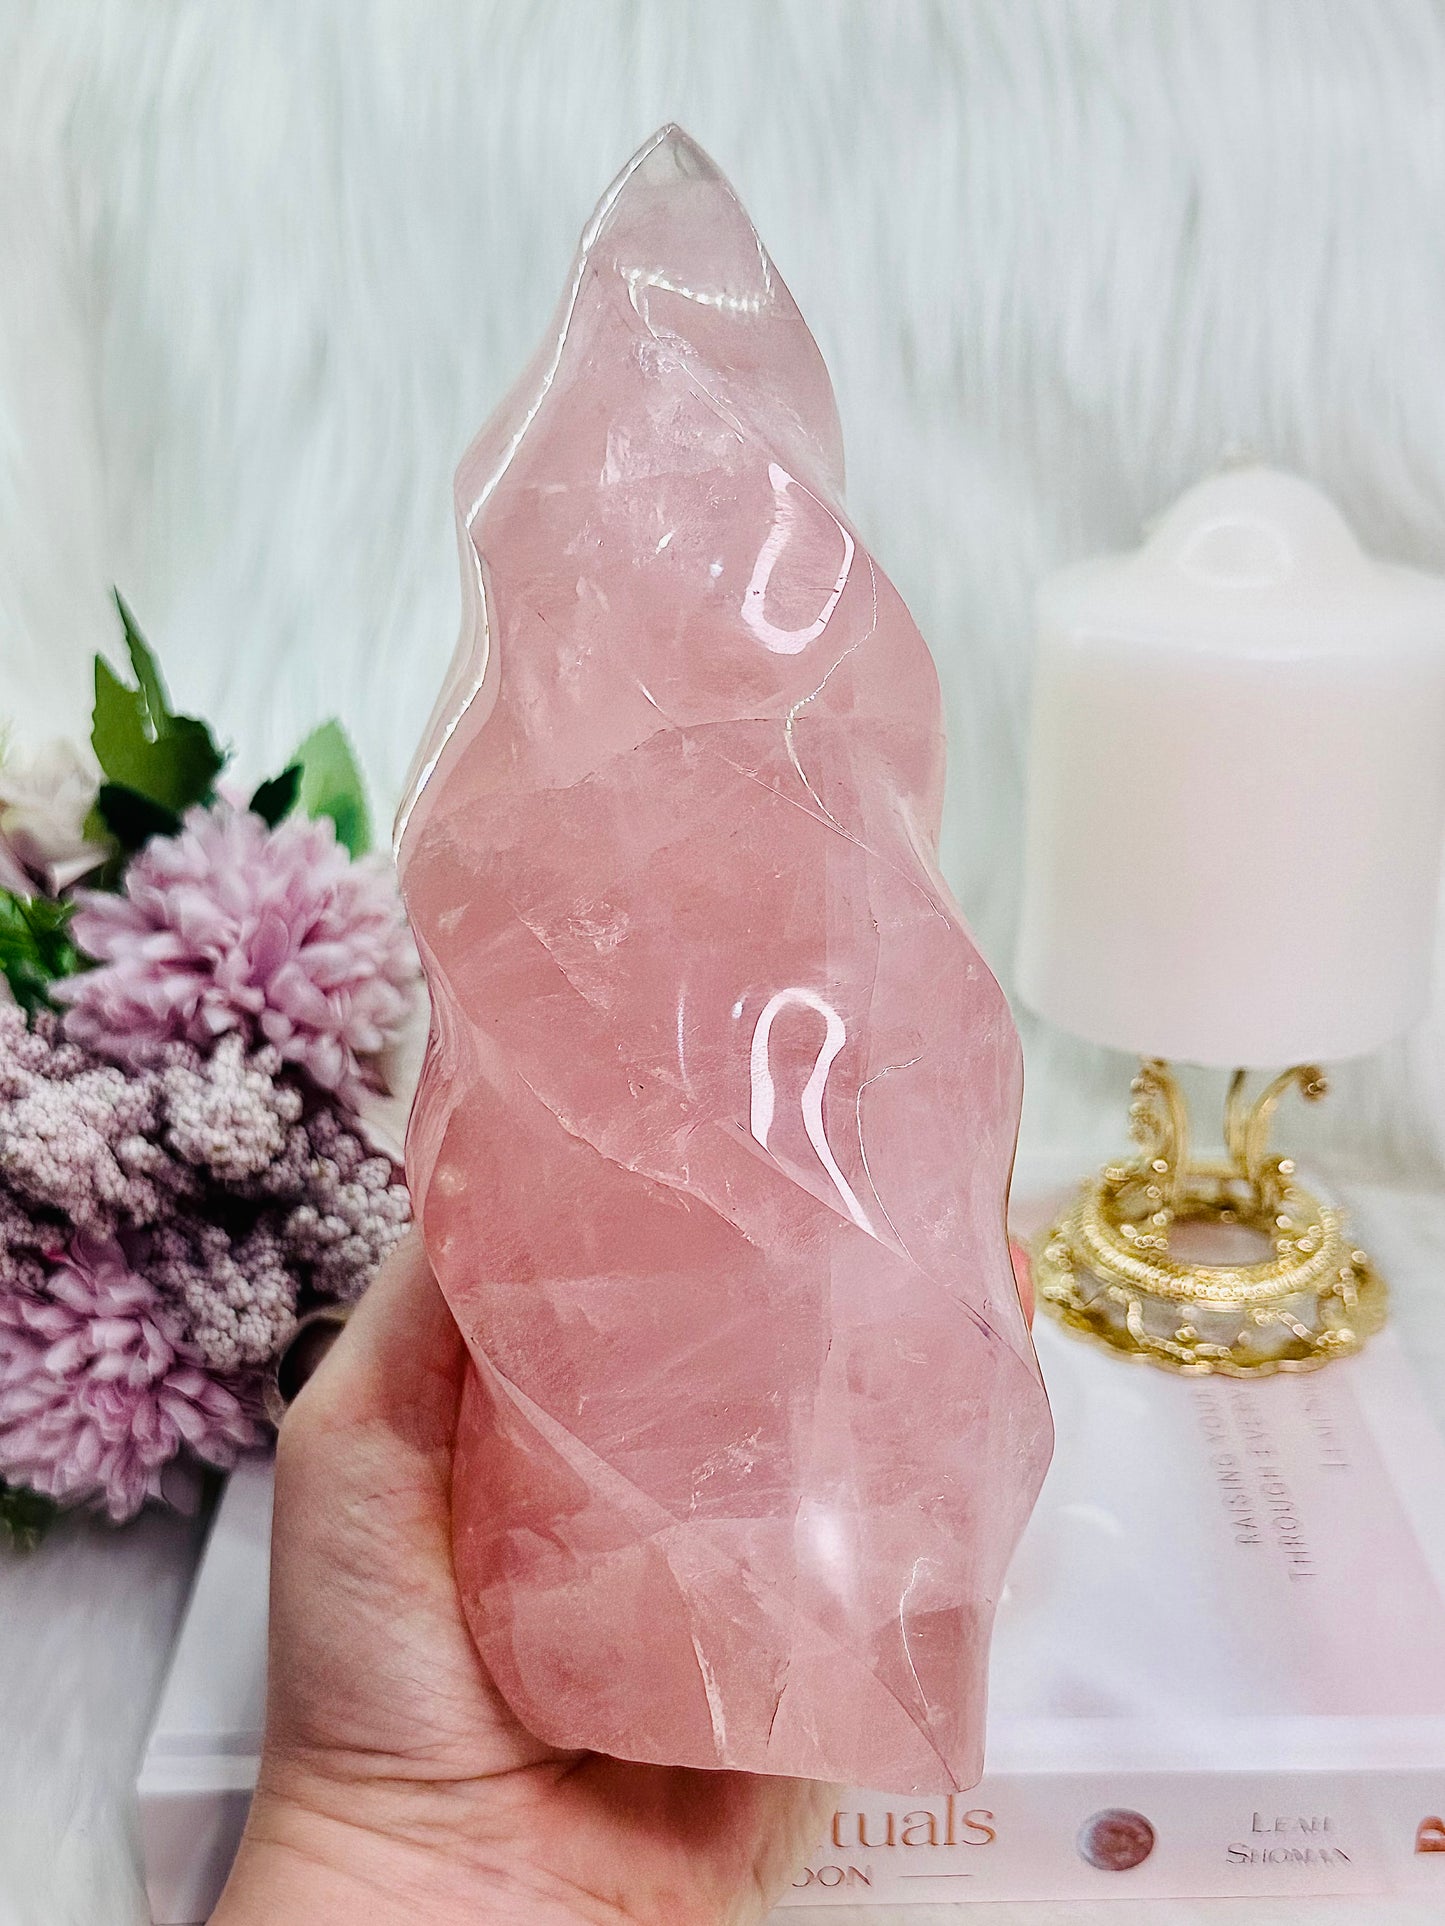 WOWOWOW!!!! Huge 1.78KG 21cm Stunning Rose Quartz Carved Flame Absolutely Spectacular